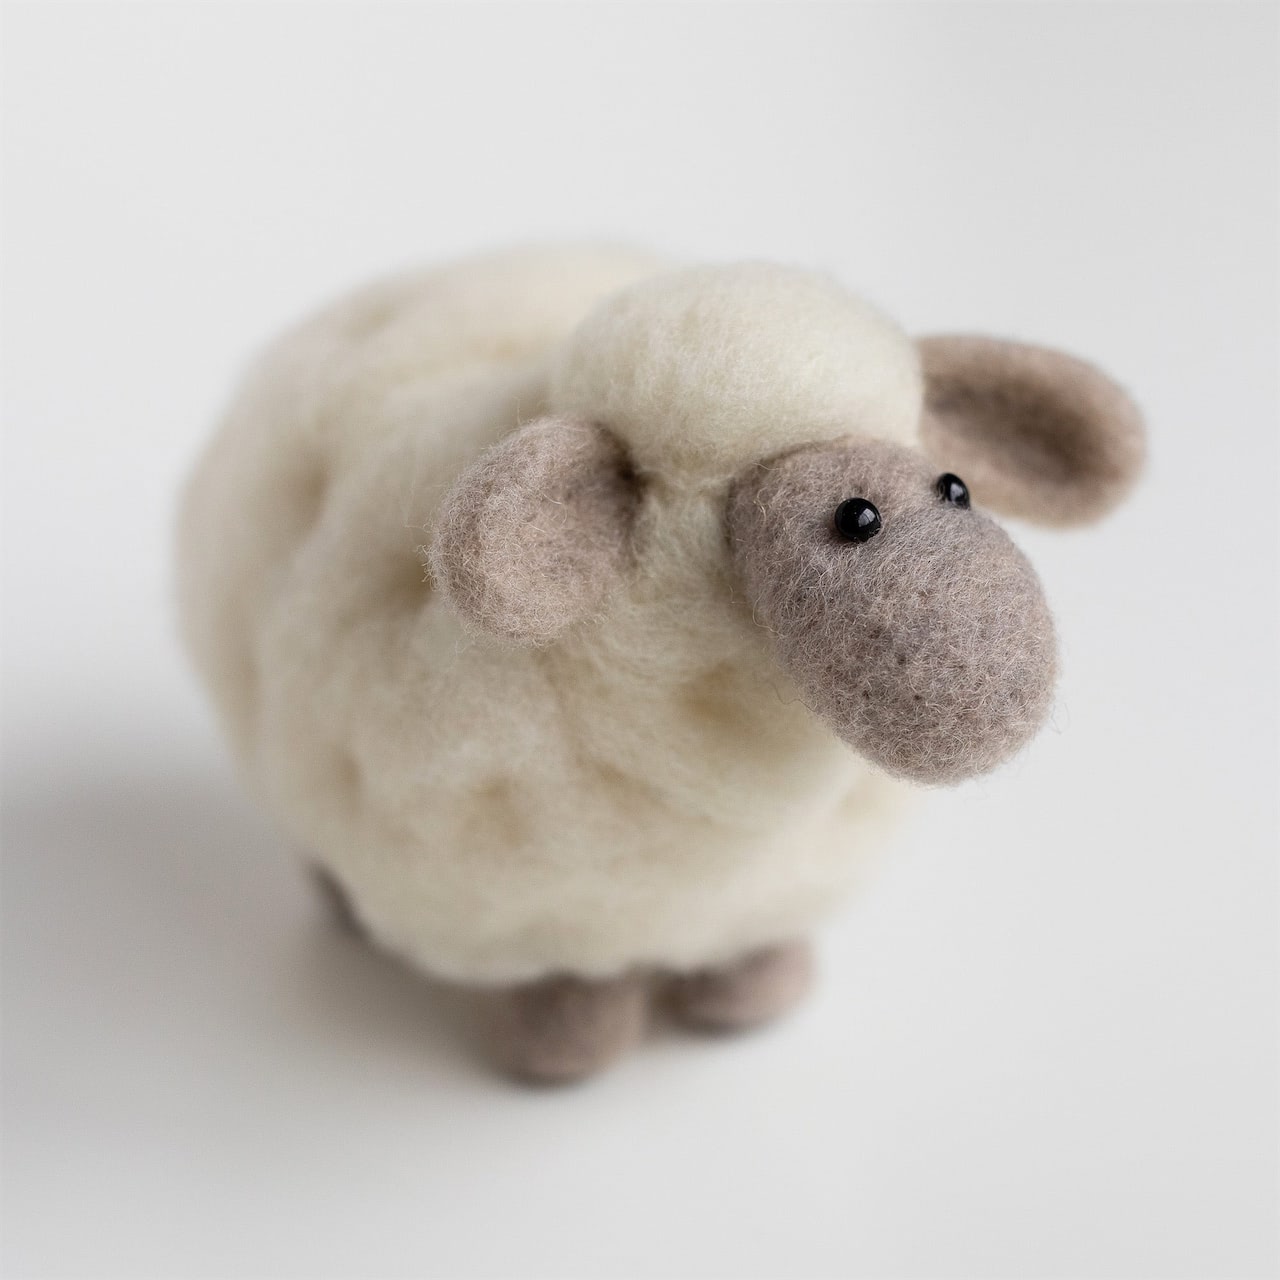 A kit to create a needle felted white sheep.